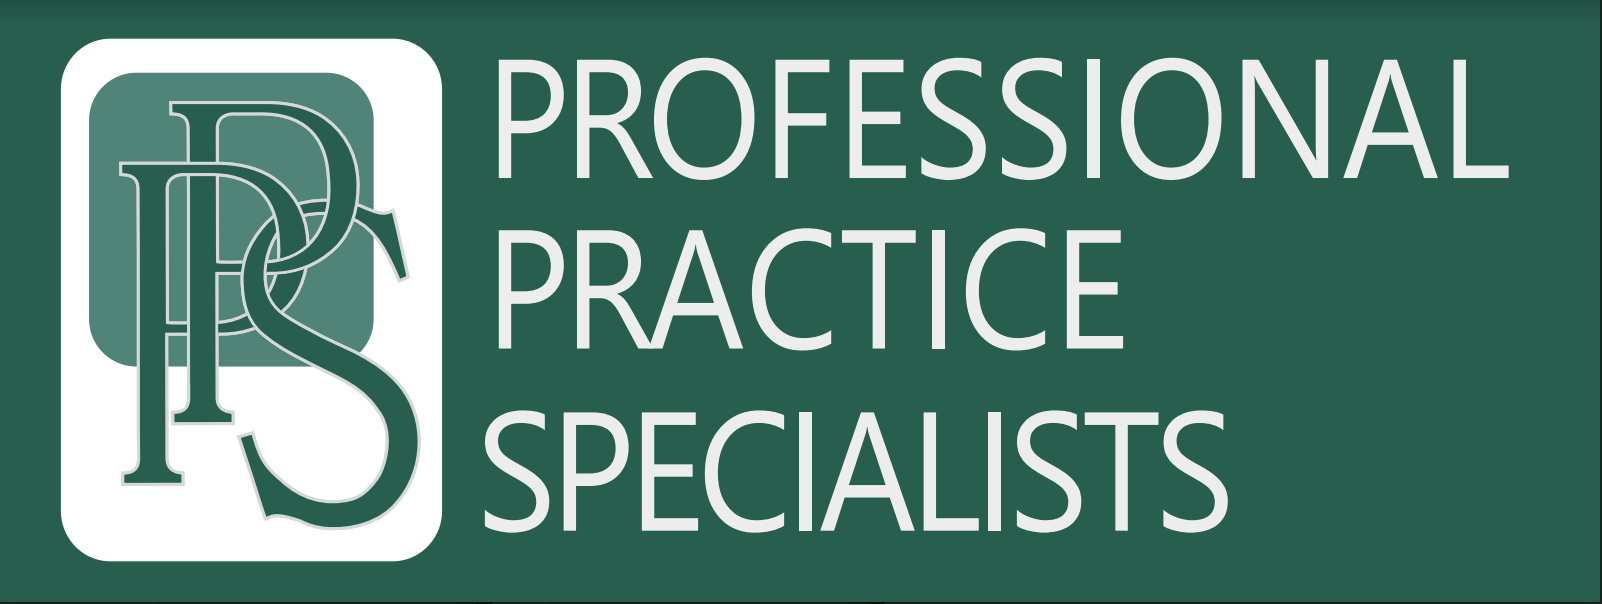 Professional Practice Specialists Logo